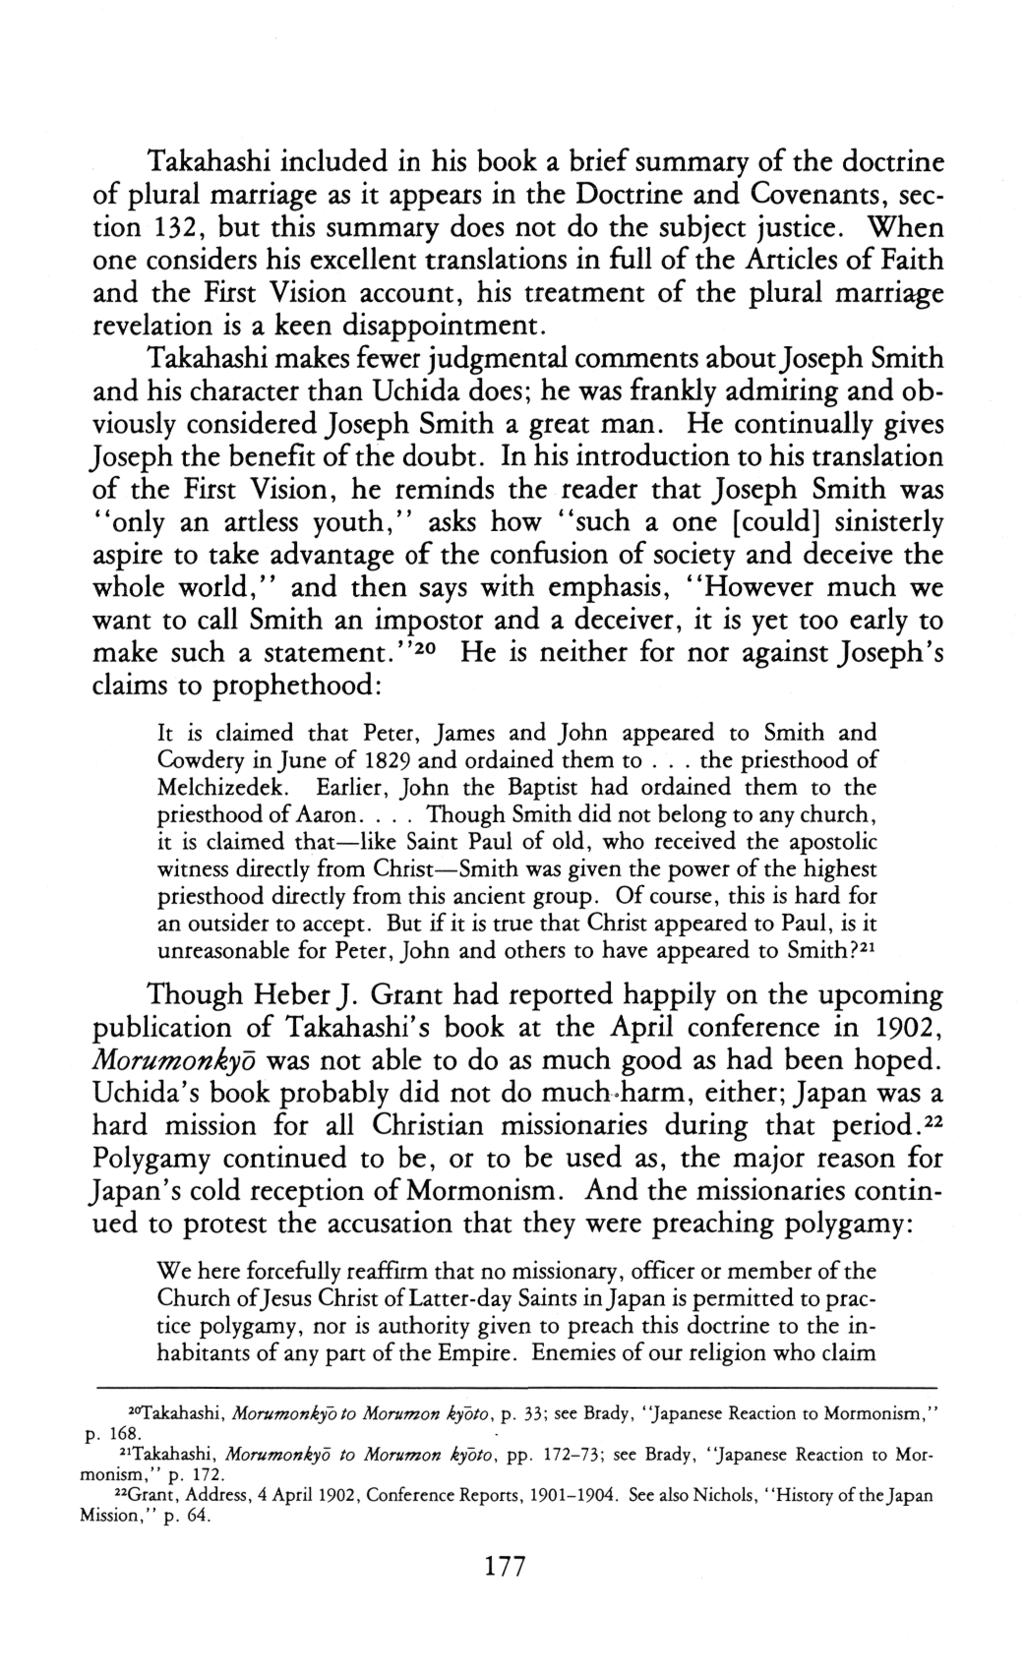 Brady: Two Meiji Scholars Introduce the Mormons to Japan takahashi included in his book a brief summary of the doctrine of plural marriage as it appears in the doctrine and covenants section 132 but